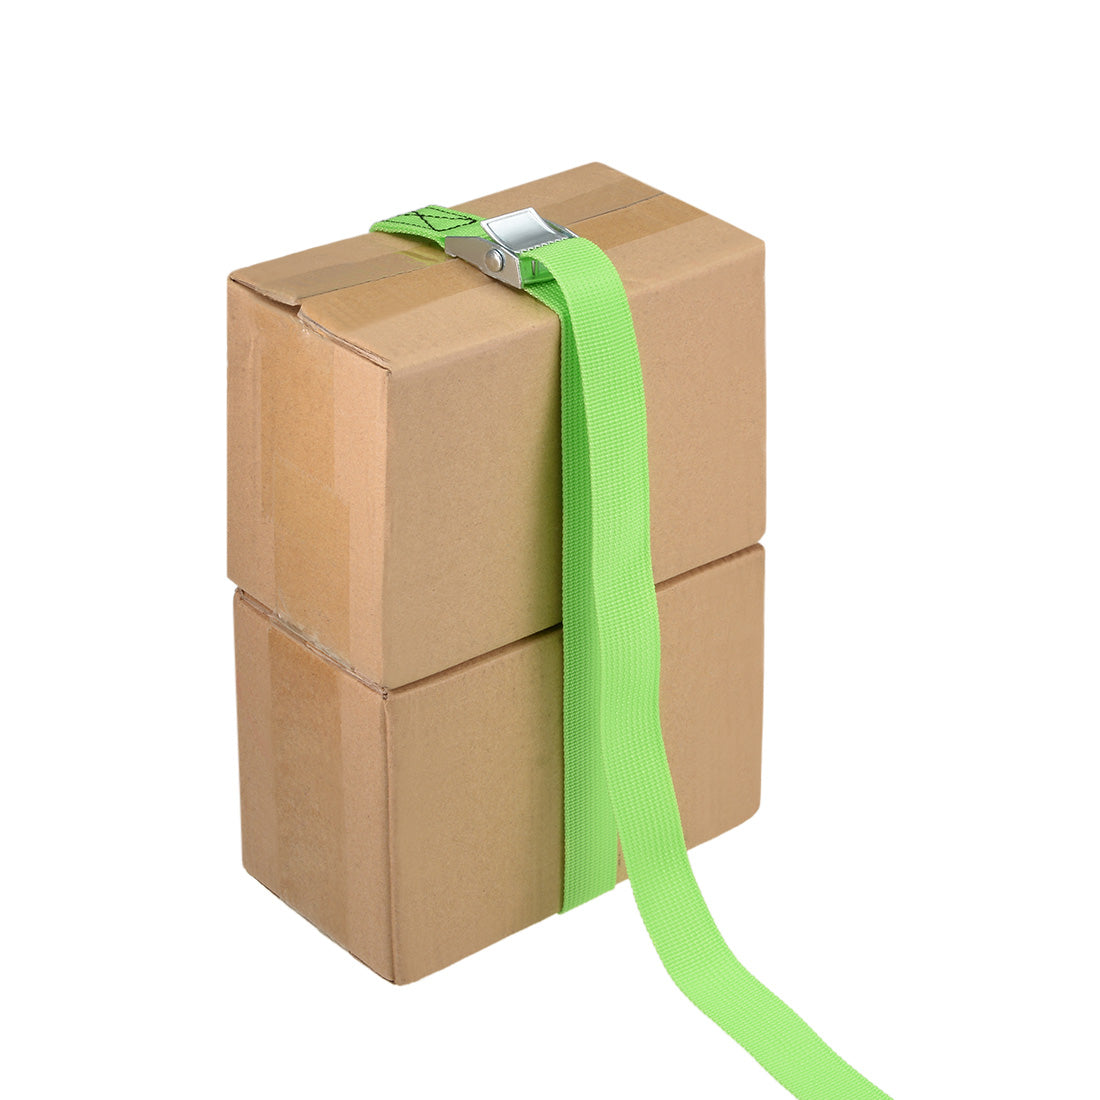 uxcell Uxcell Lashing Strap 1" x 14.7' Cargo Tie Down Straps with Cam Lock Buckle Up to 551Lbs Green 2pcs